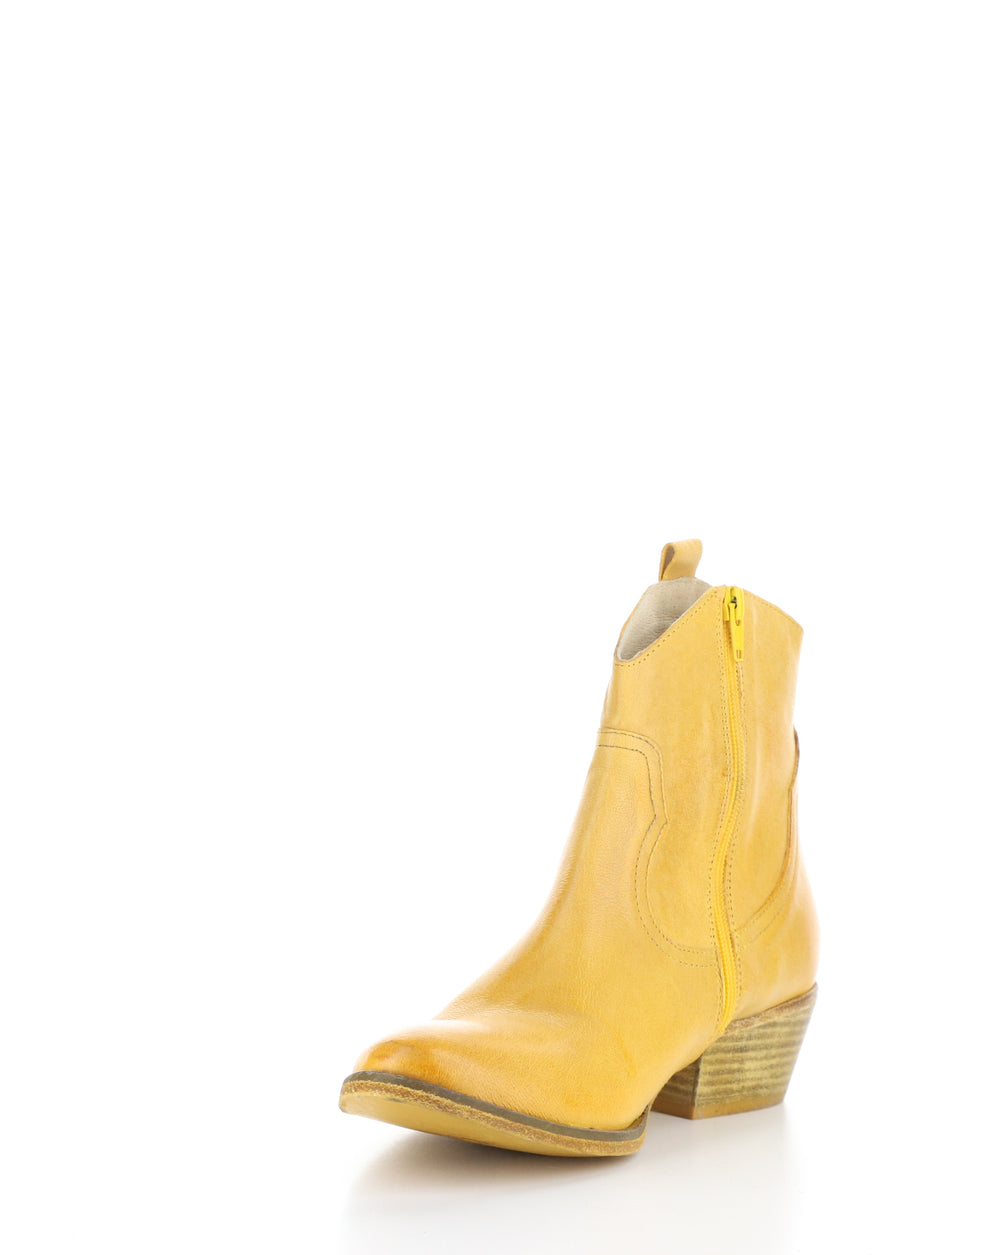 WAMI092FLY 002 YELLOW Round Toe Boots